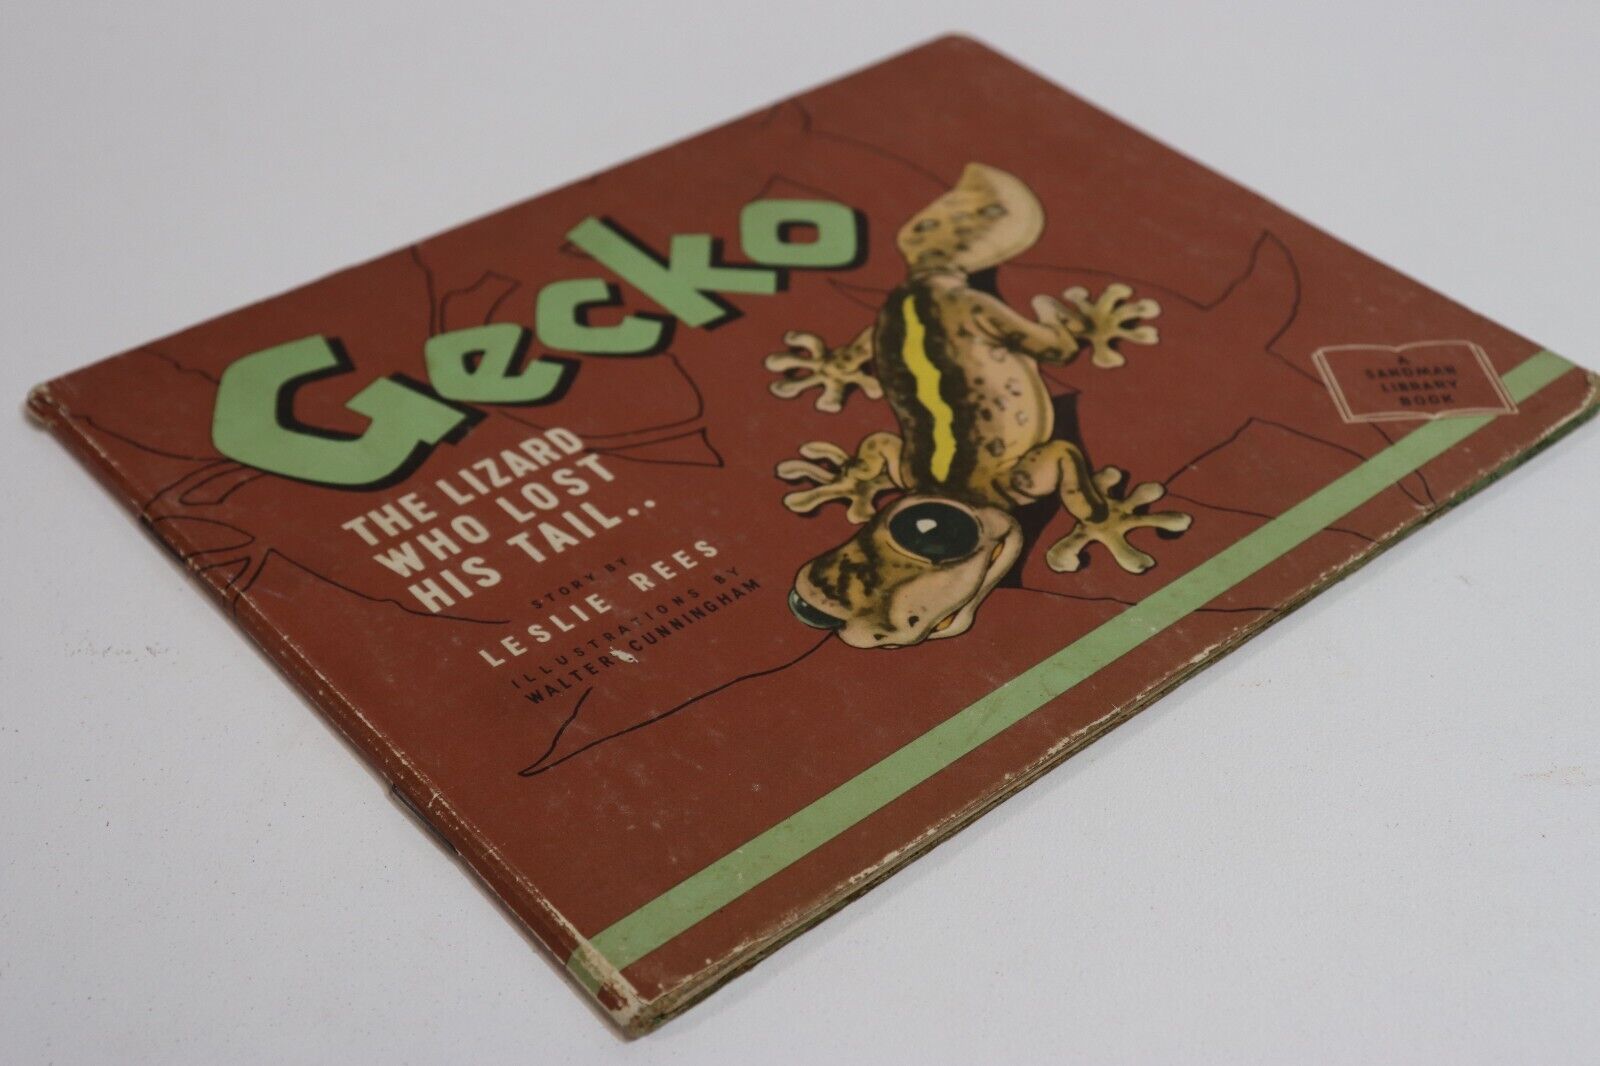 Gecko: The Lizard Who Lost His Tail - 1944 - Antique Children's Book